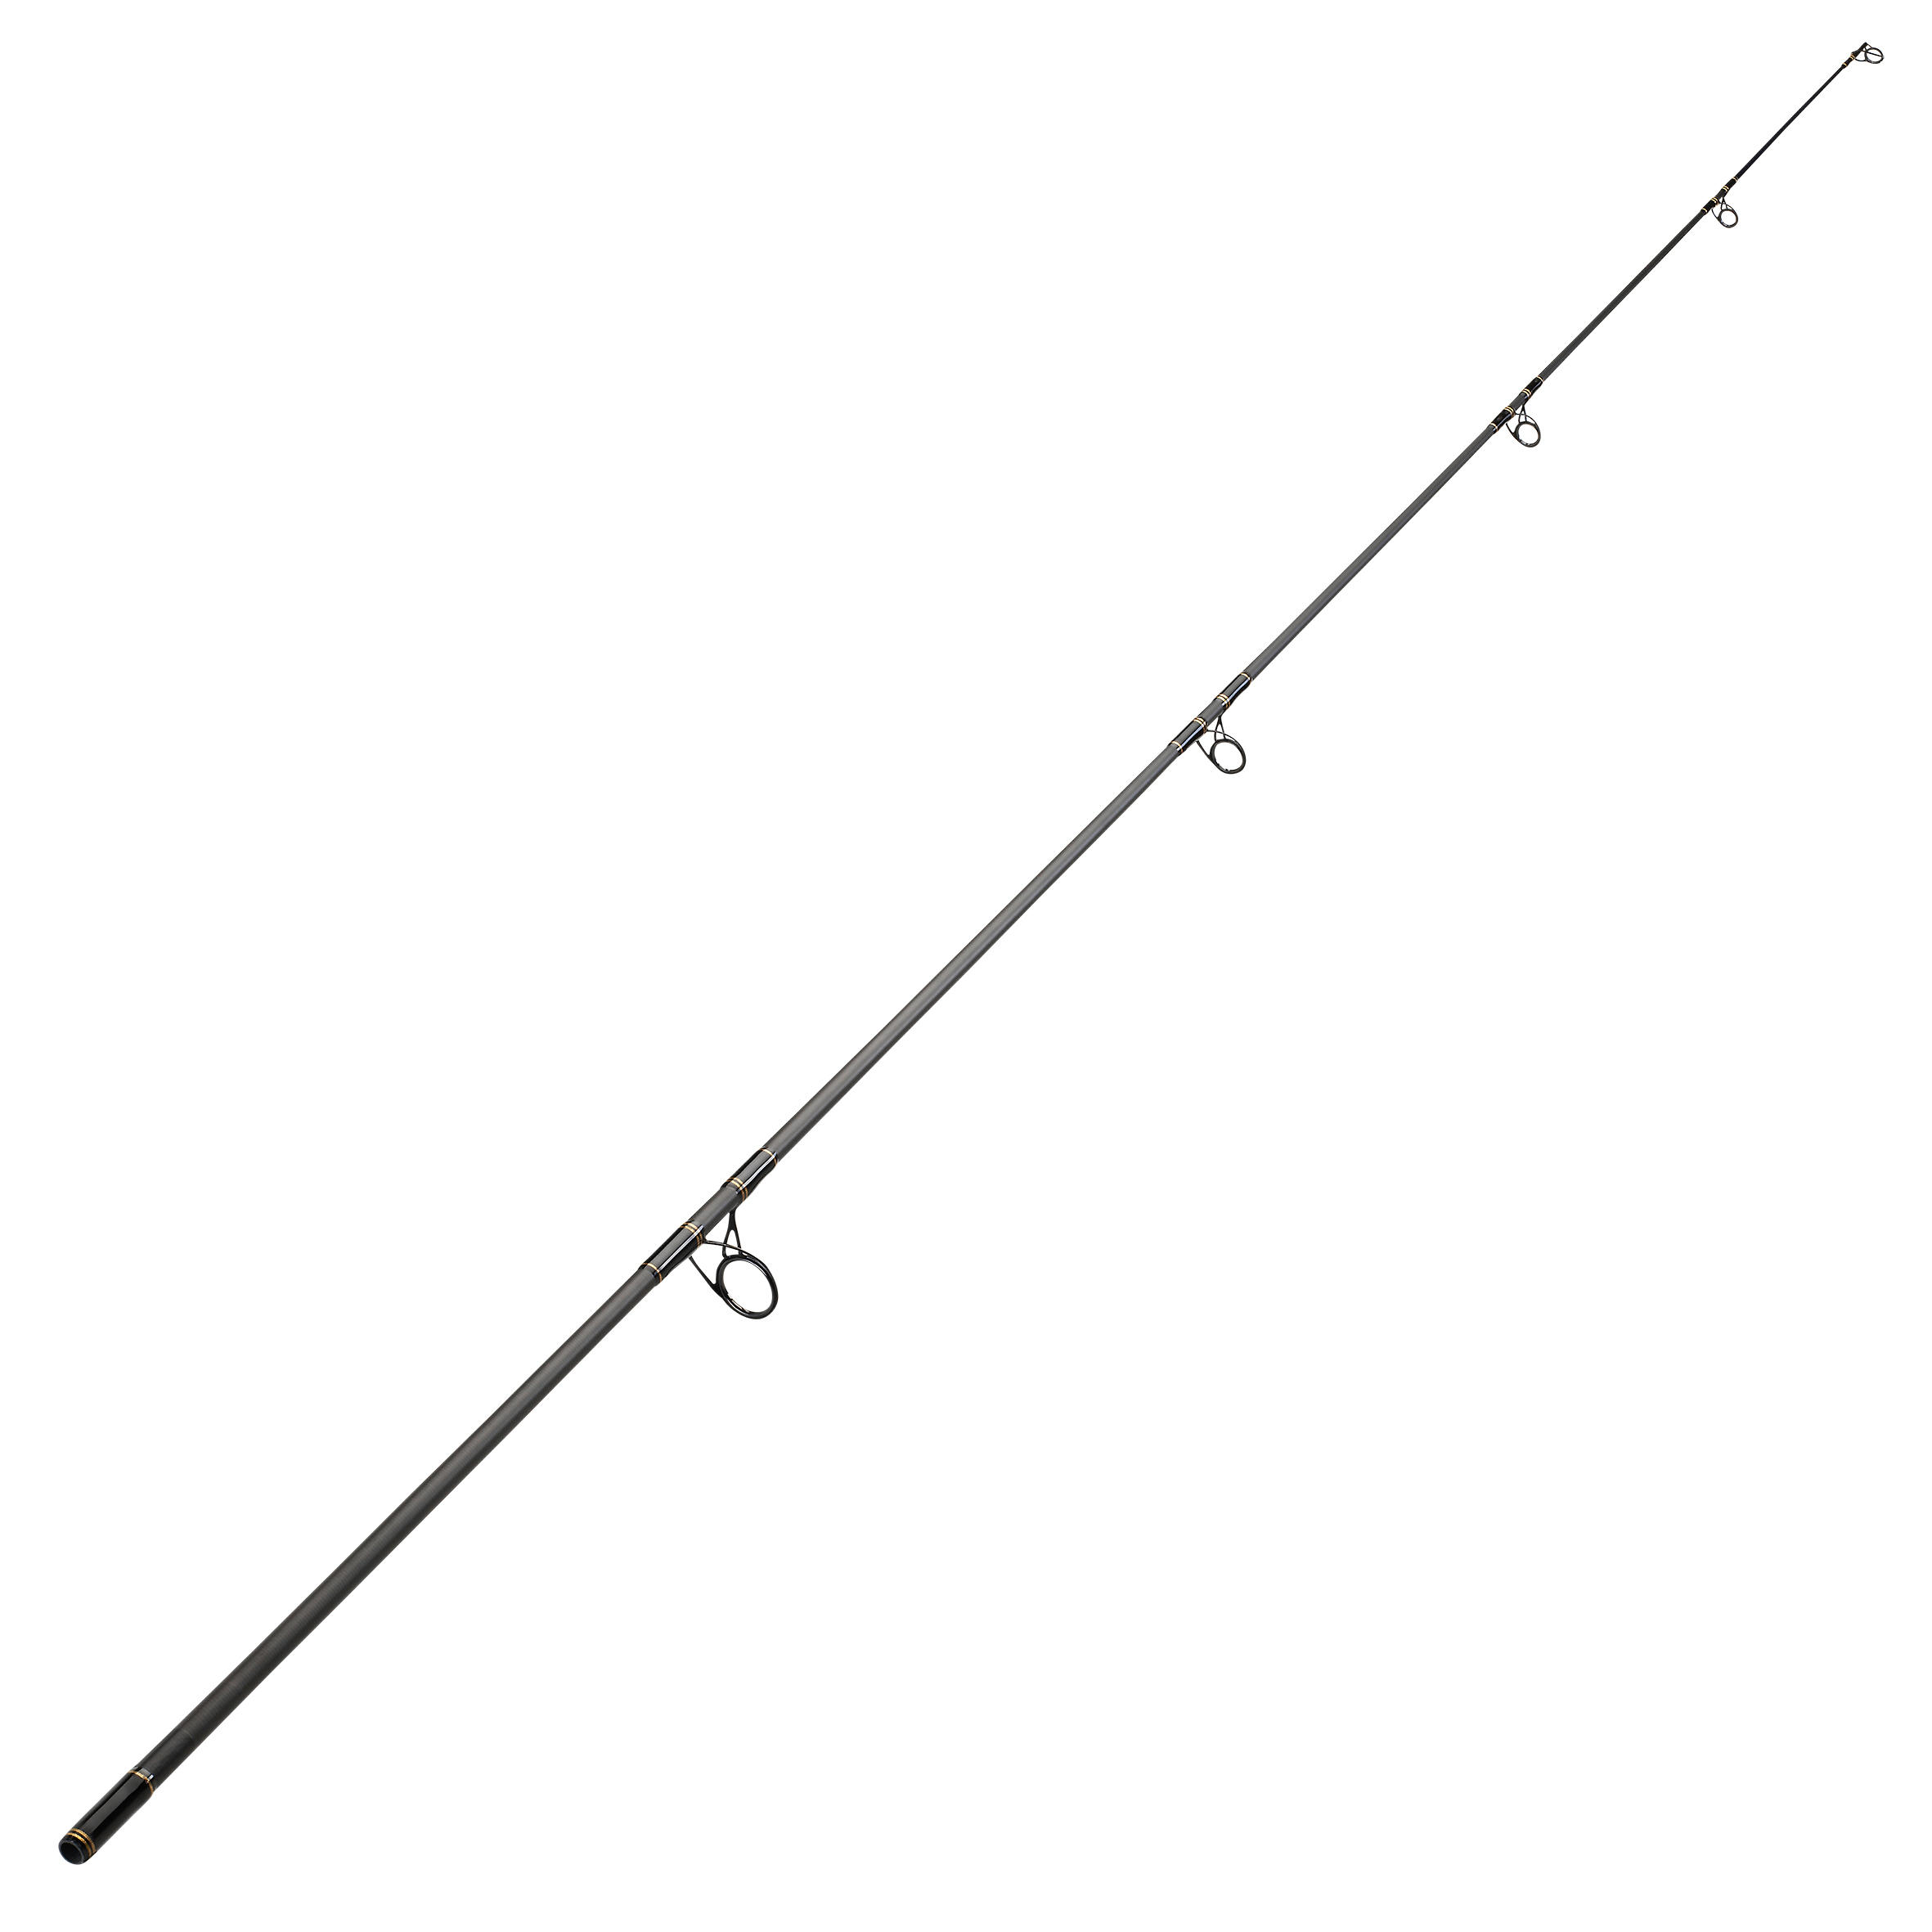 Replacement Tip For The Xtrem 9 Slim 360 (12 Feet) Rod For Carp Fishing.